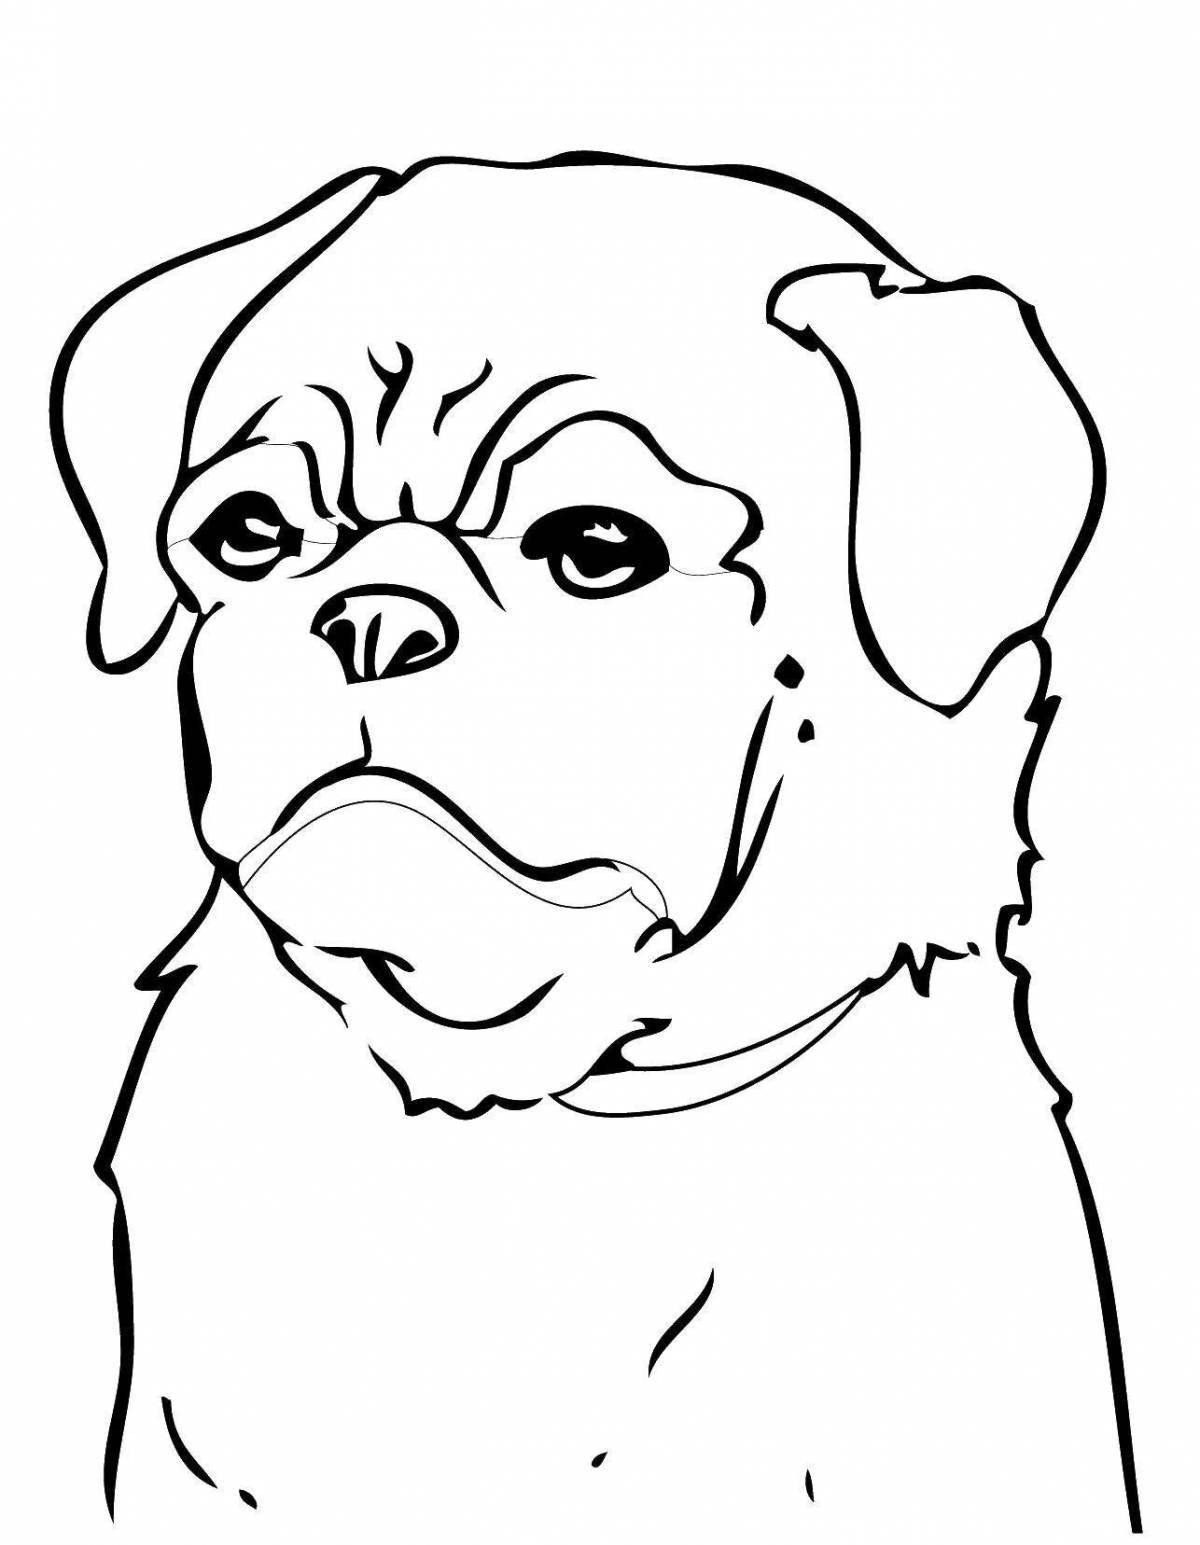 Pug content coloring page